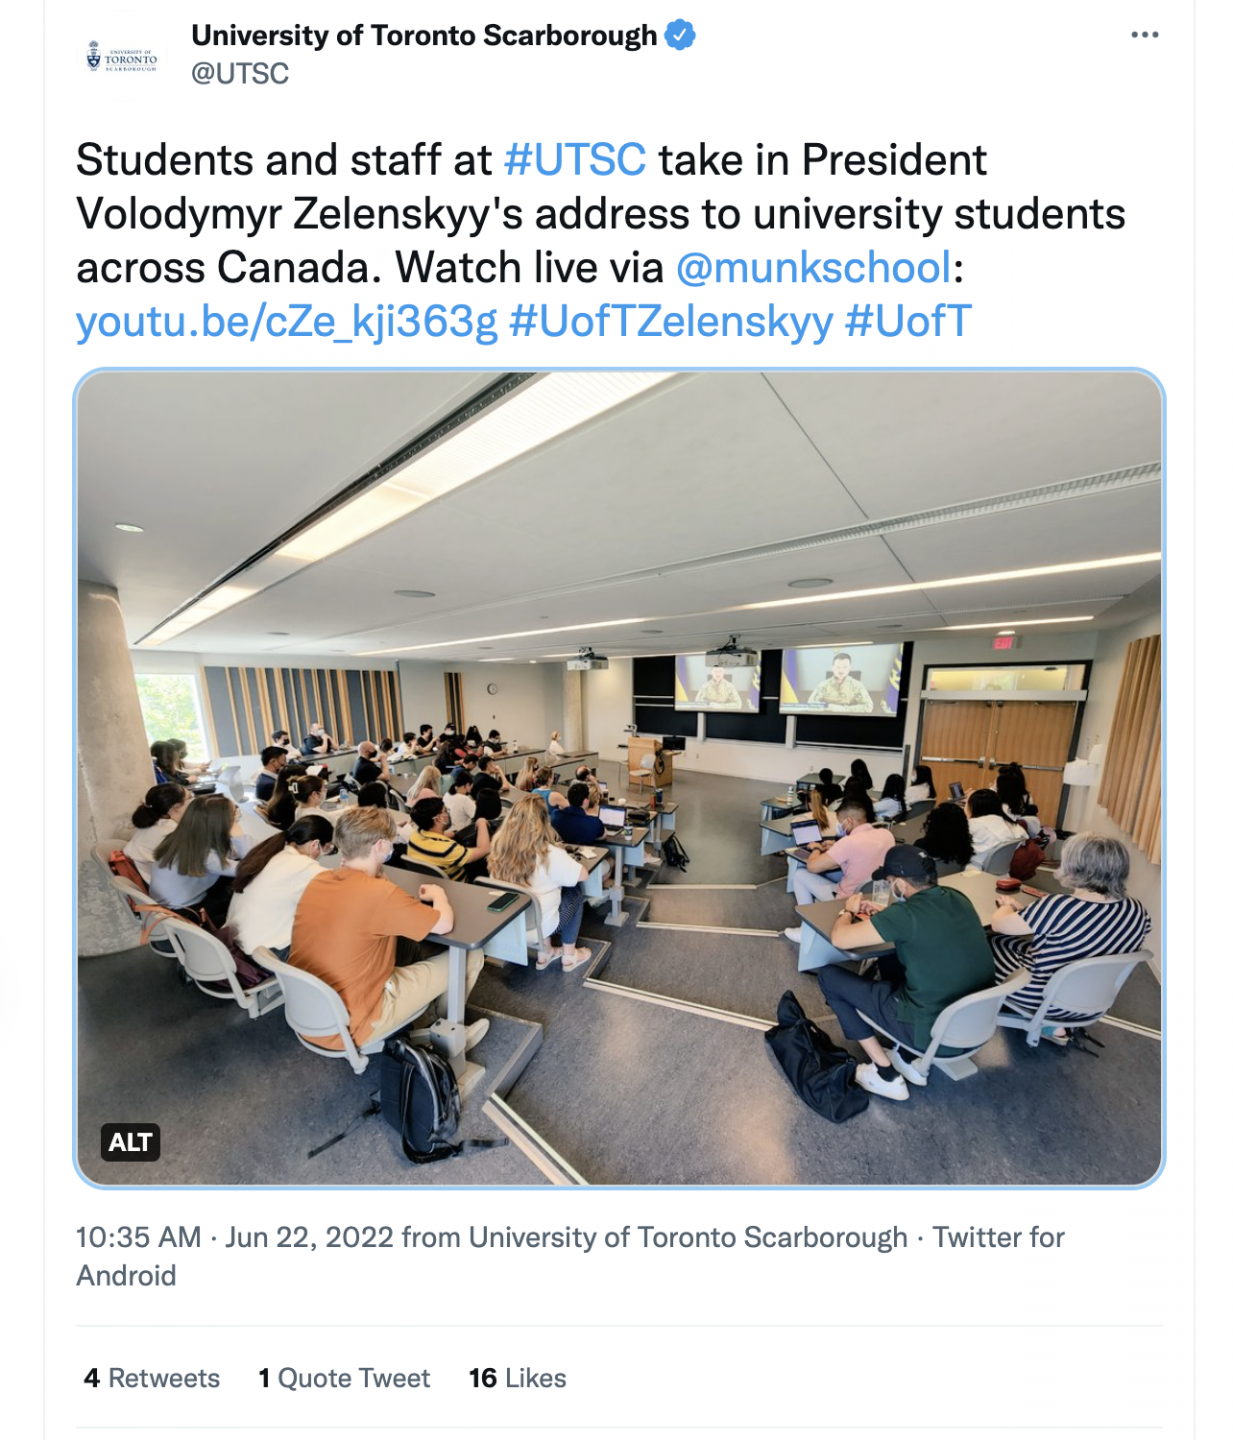 UTSC viewing event